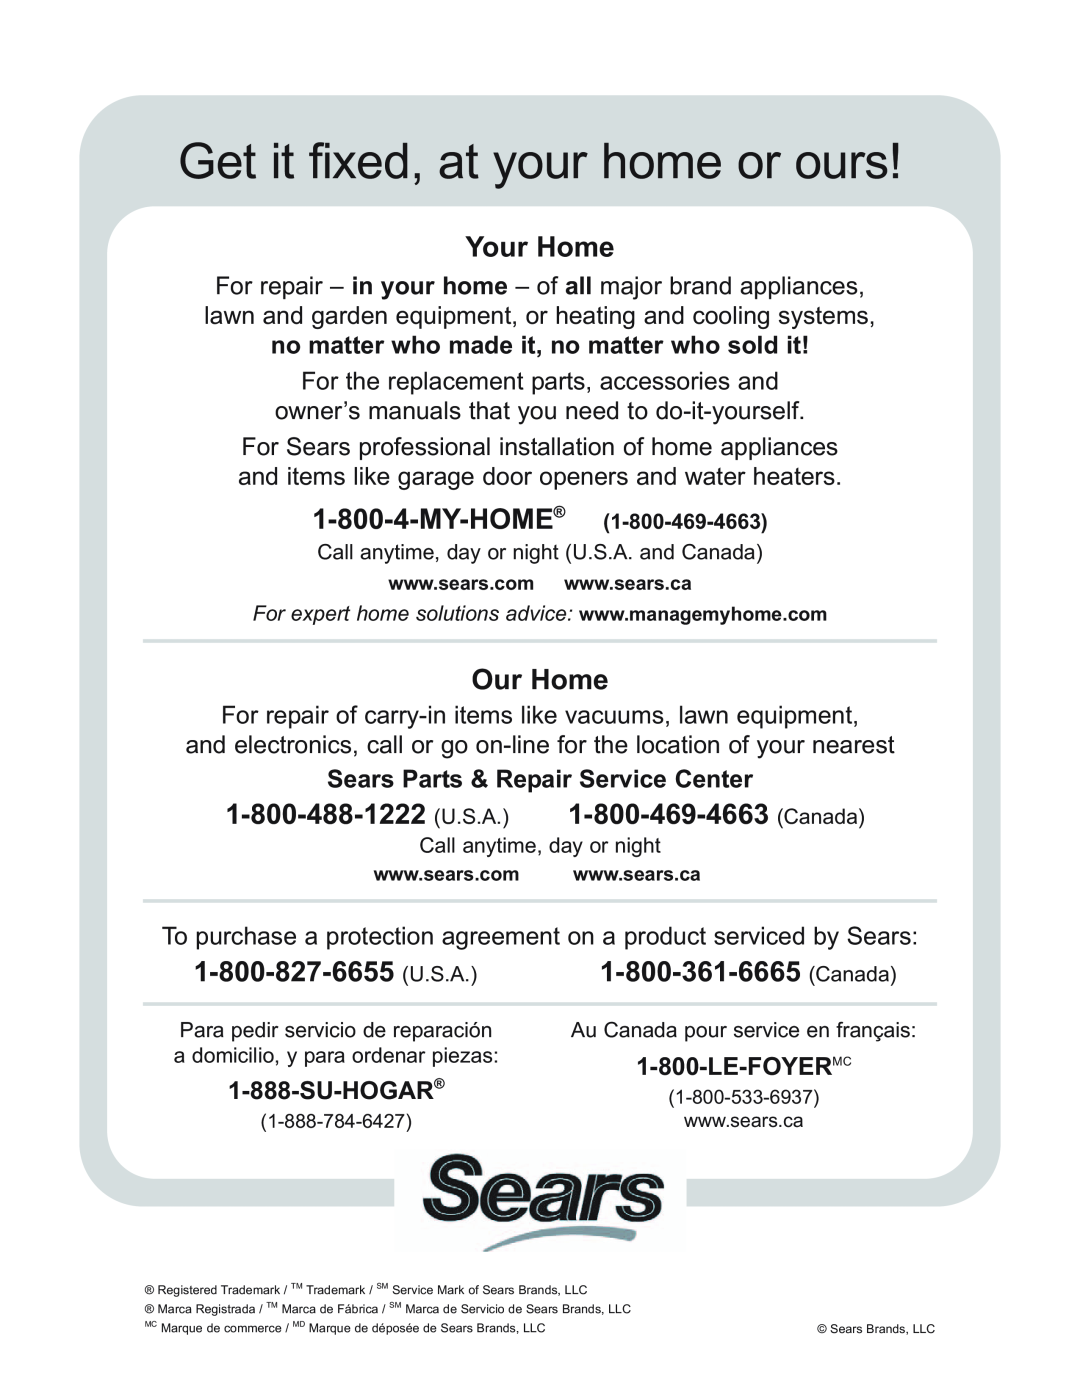 Kenmore 625.38501 Sears Parts & Repair Service Center, Su-Hogar, Get it fixed, at your home or ours, Your Home, Our Home 